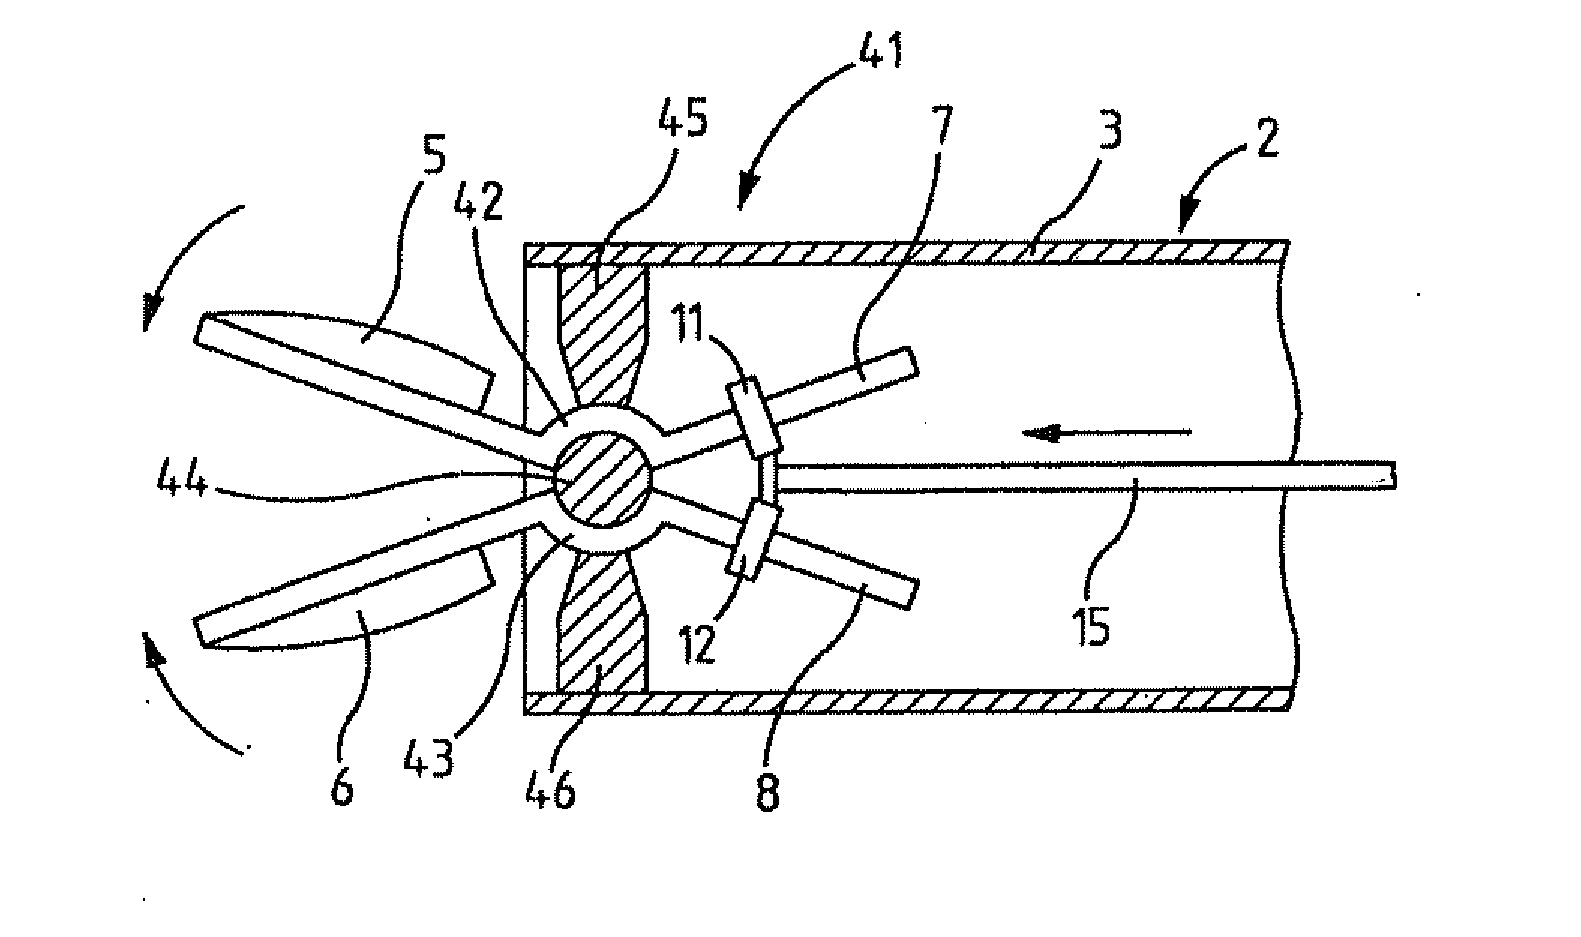 Surgical jaw instrument having a slide system